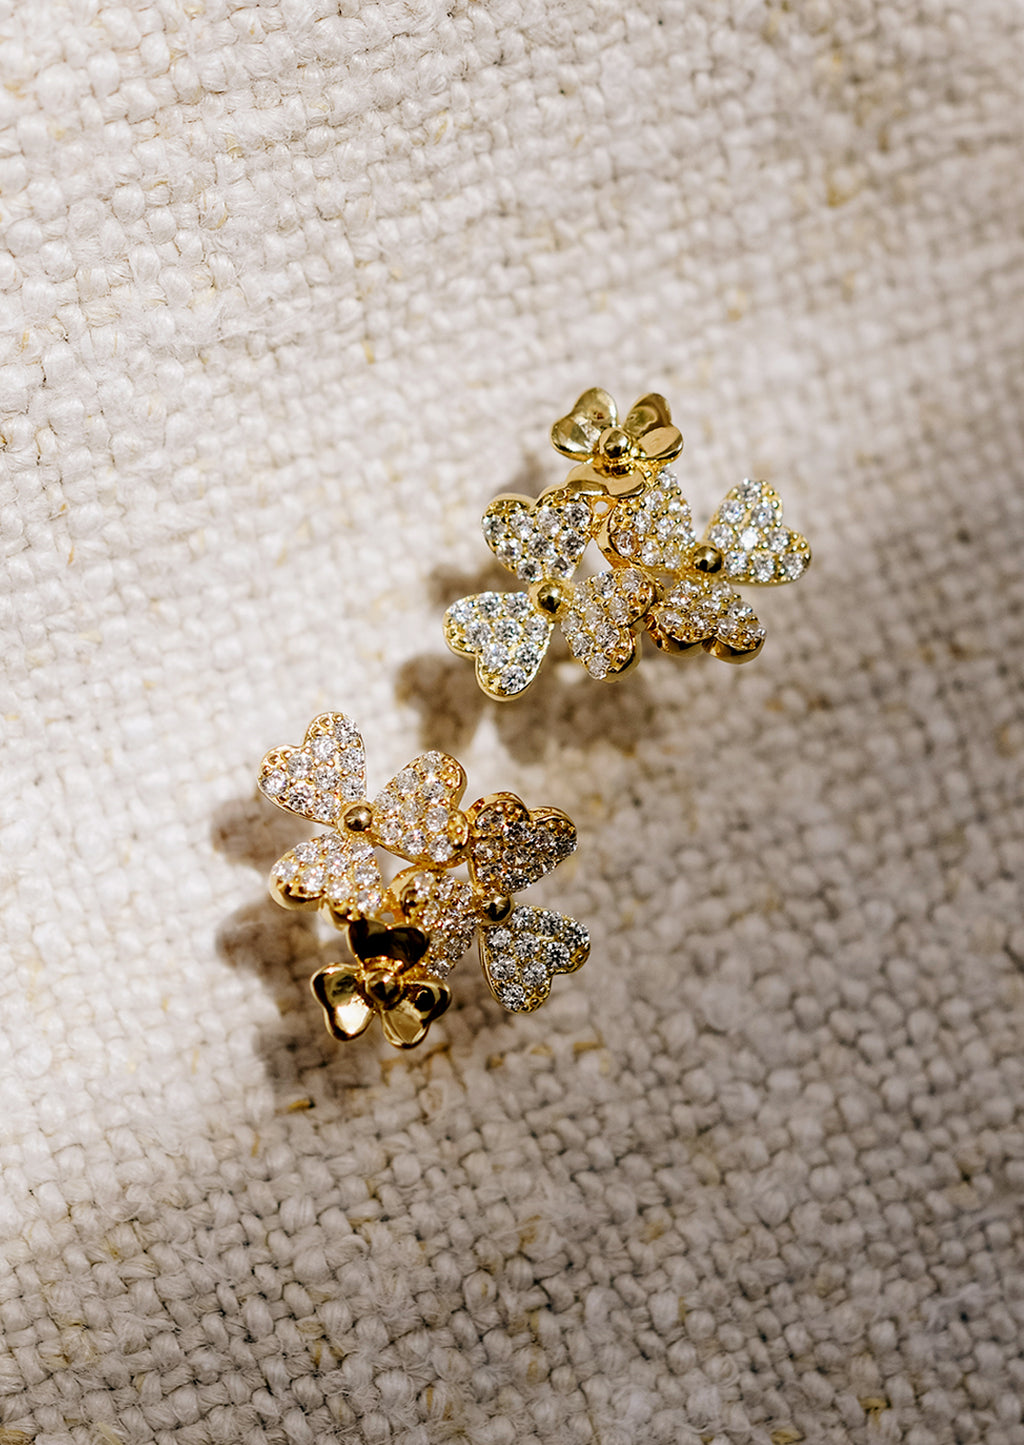 2: Gold stud earrings in shape of three flower cluster with clear crystals.